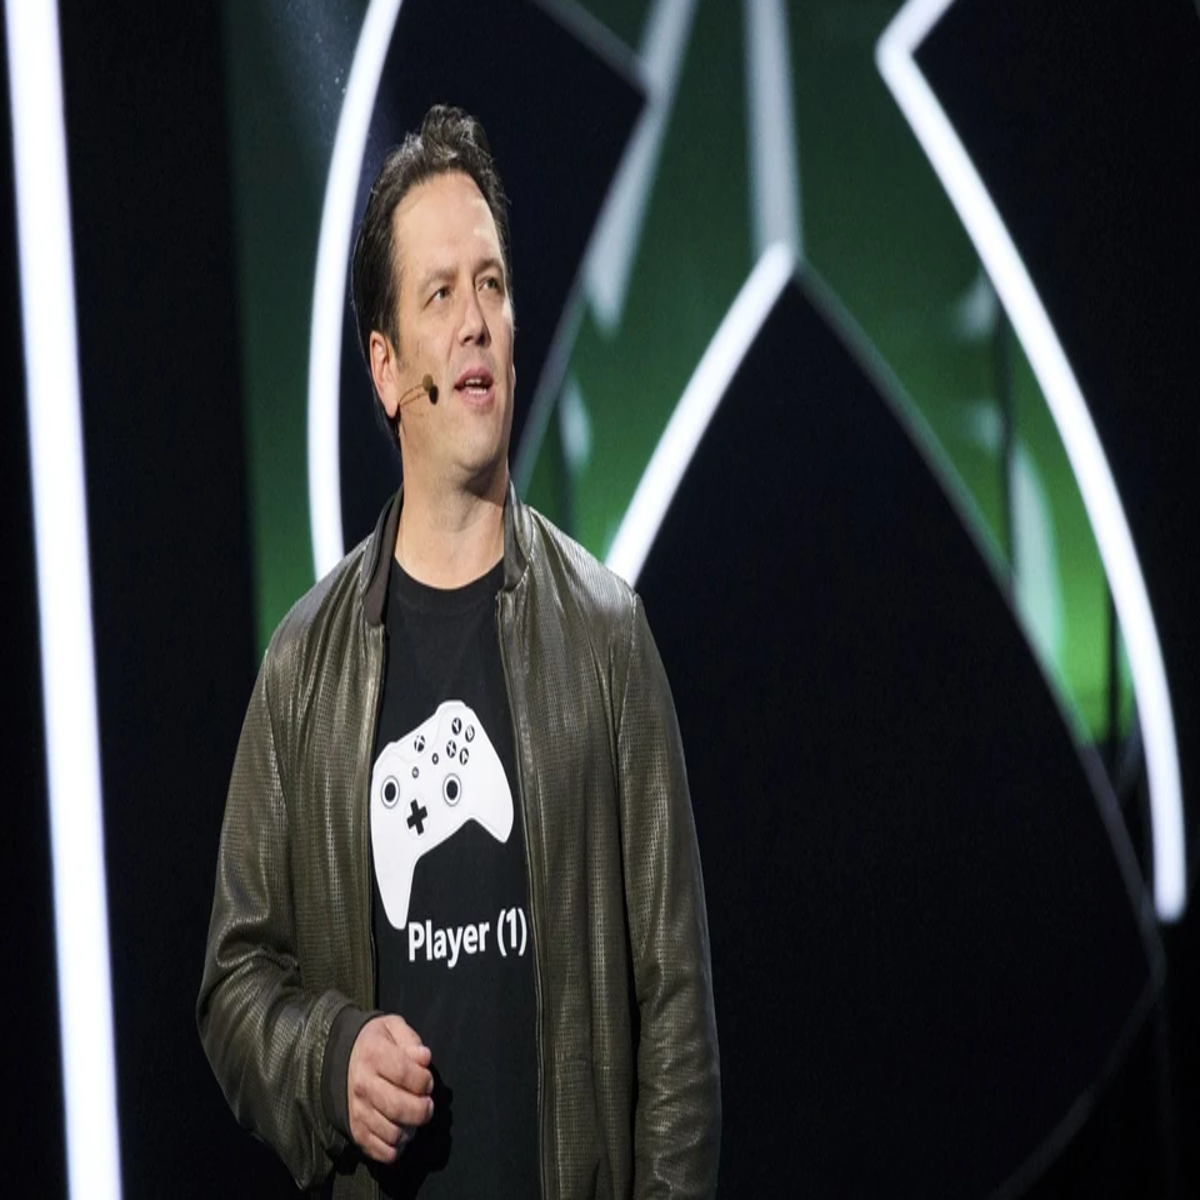 Xbox Chief Addressed Leaks: Says Gaming Giant Will Share 'Real